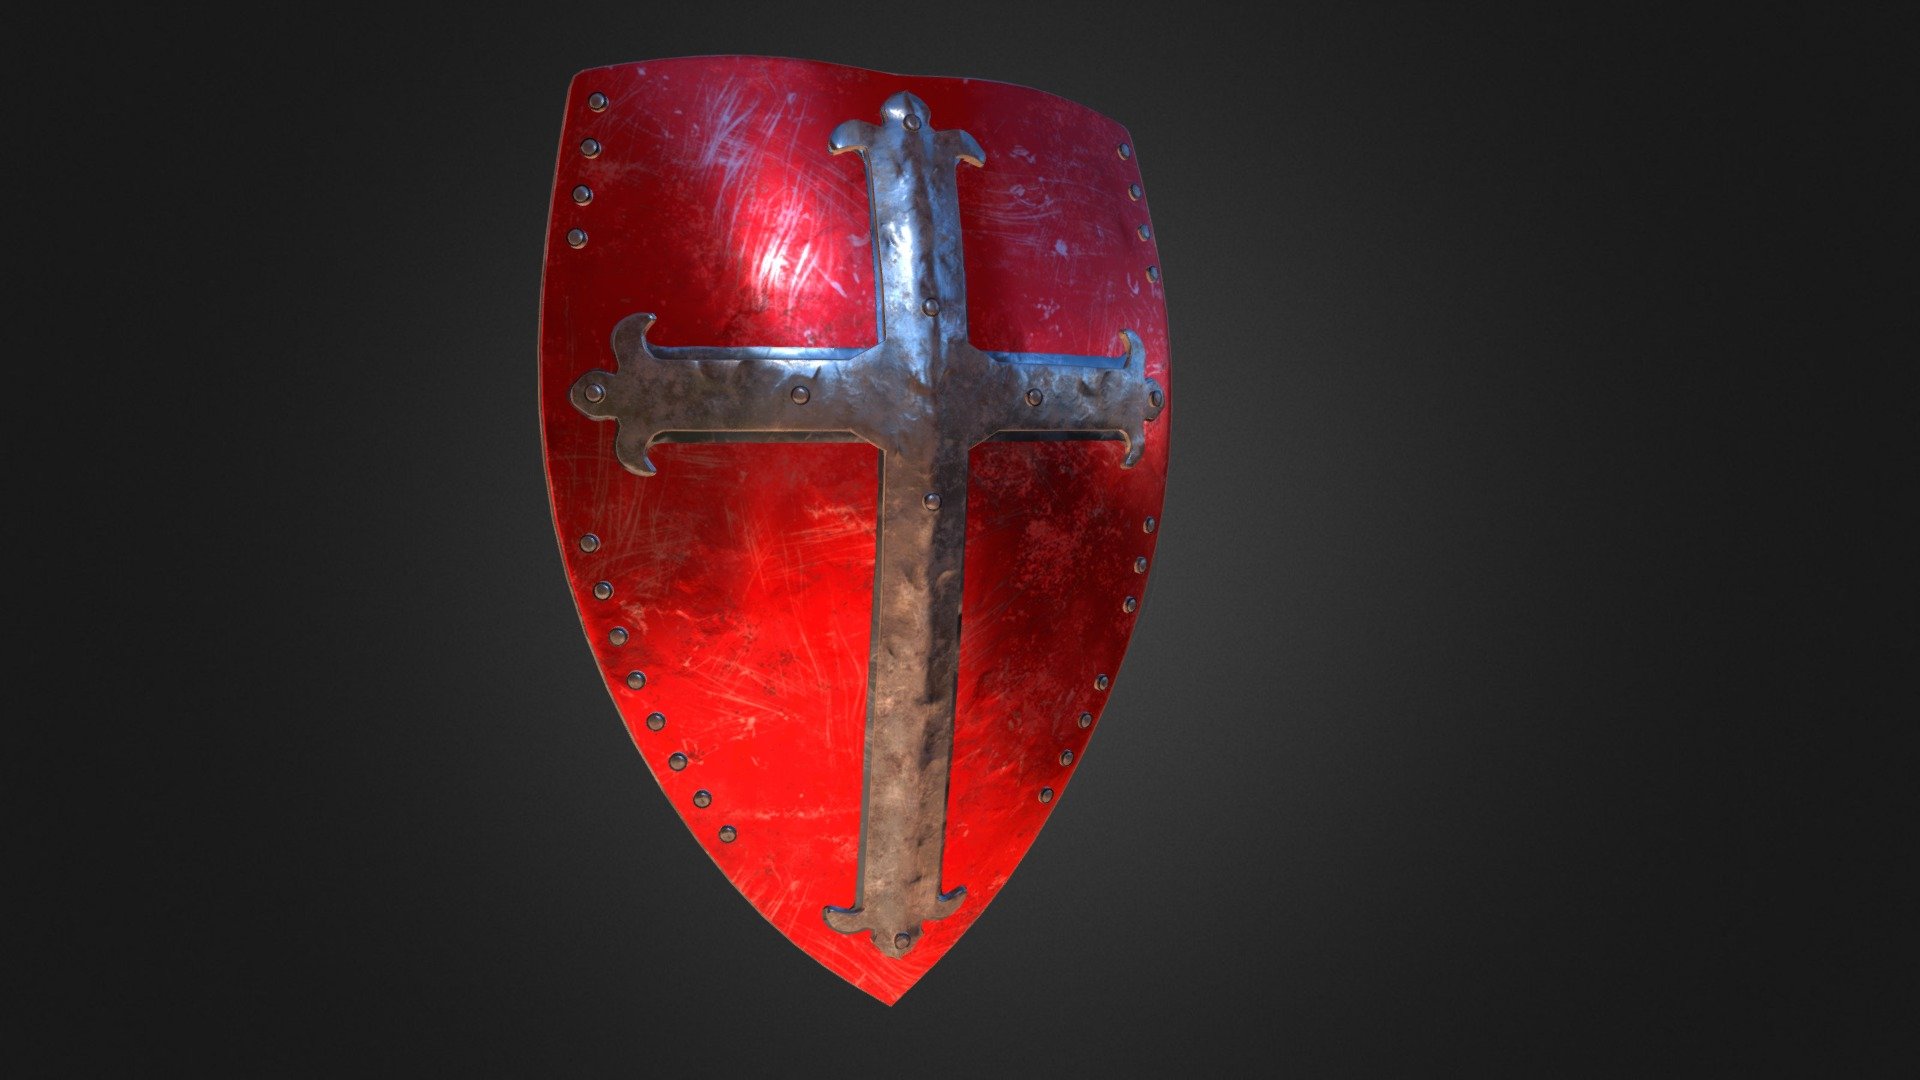 Modeled and UV map created in Maya, textured in Substance Painter 3d model